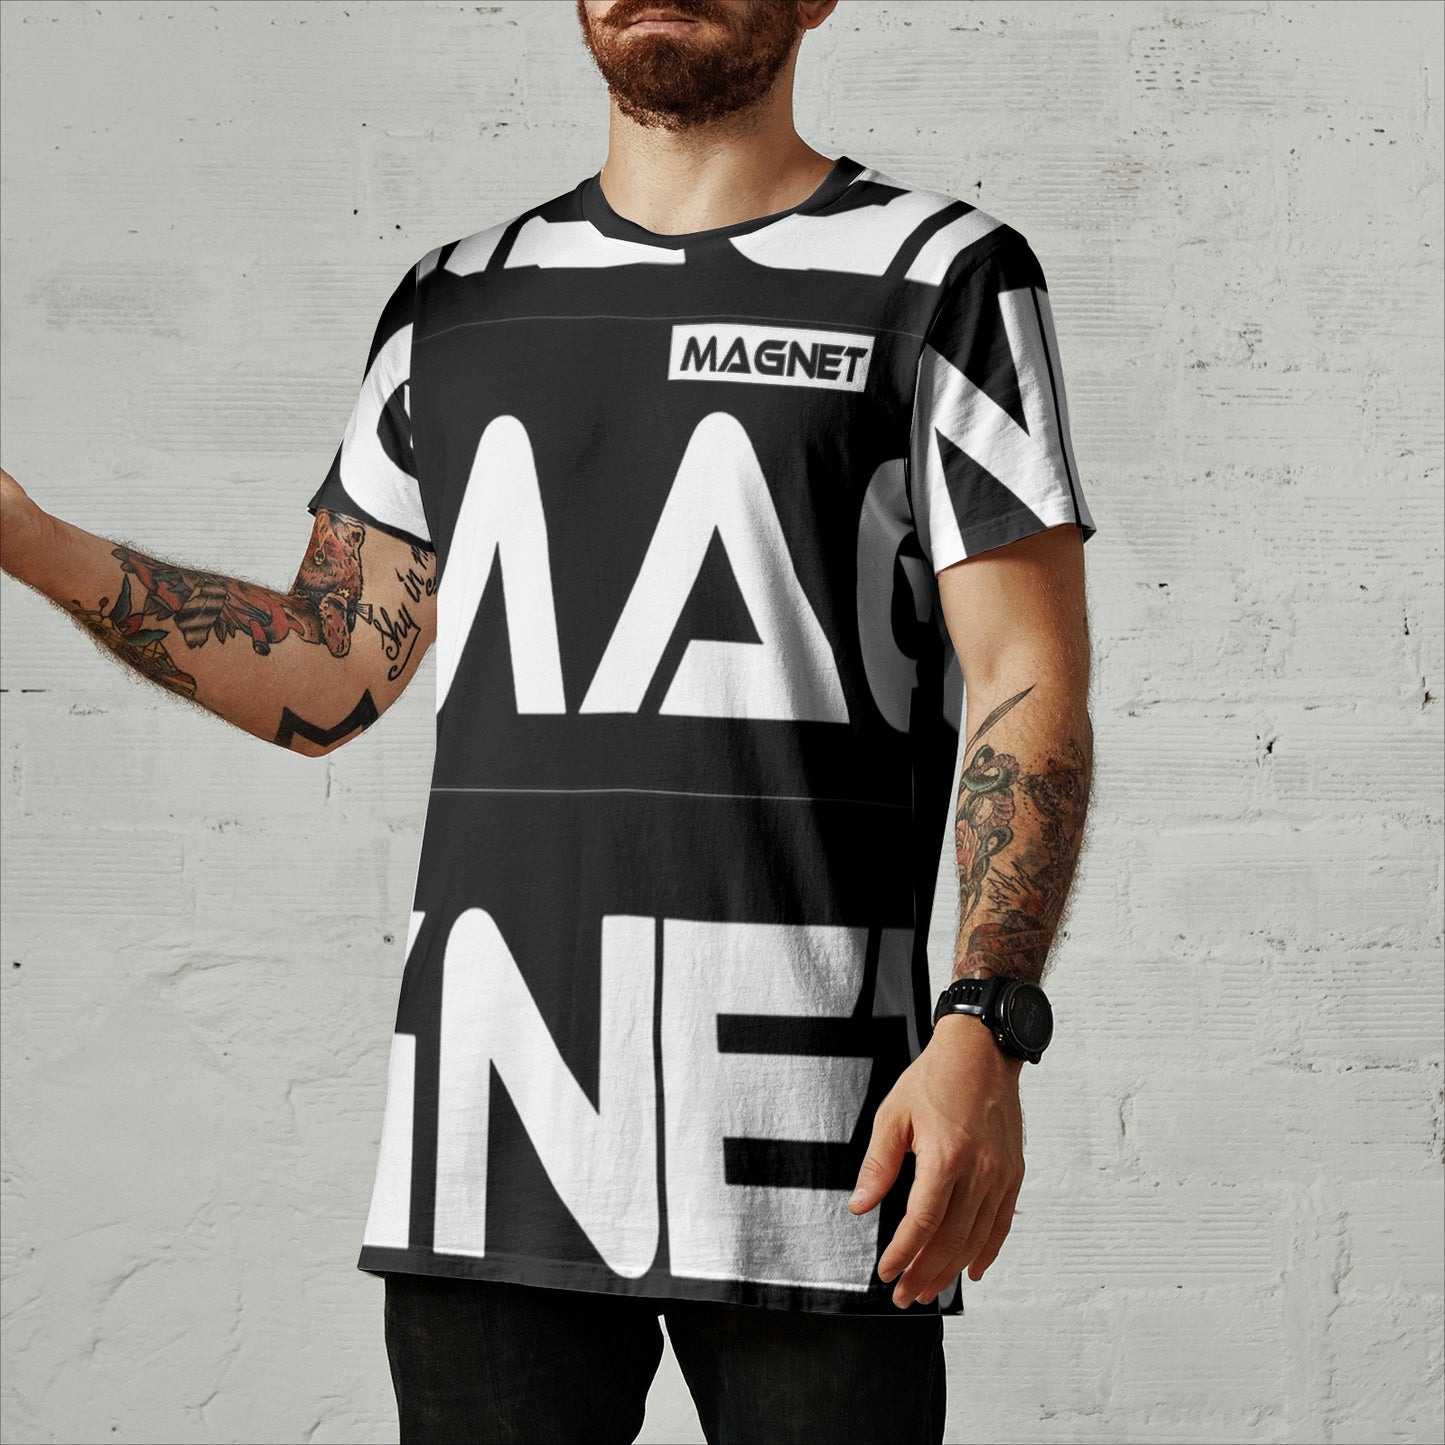 Magnet Bolo Men's All-Over Print T-shirts